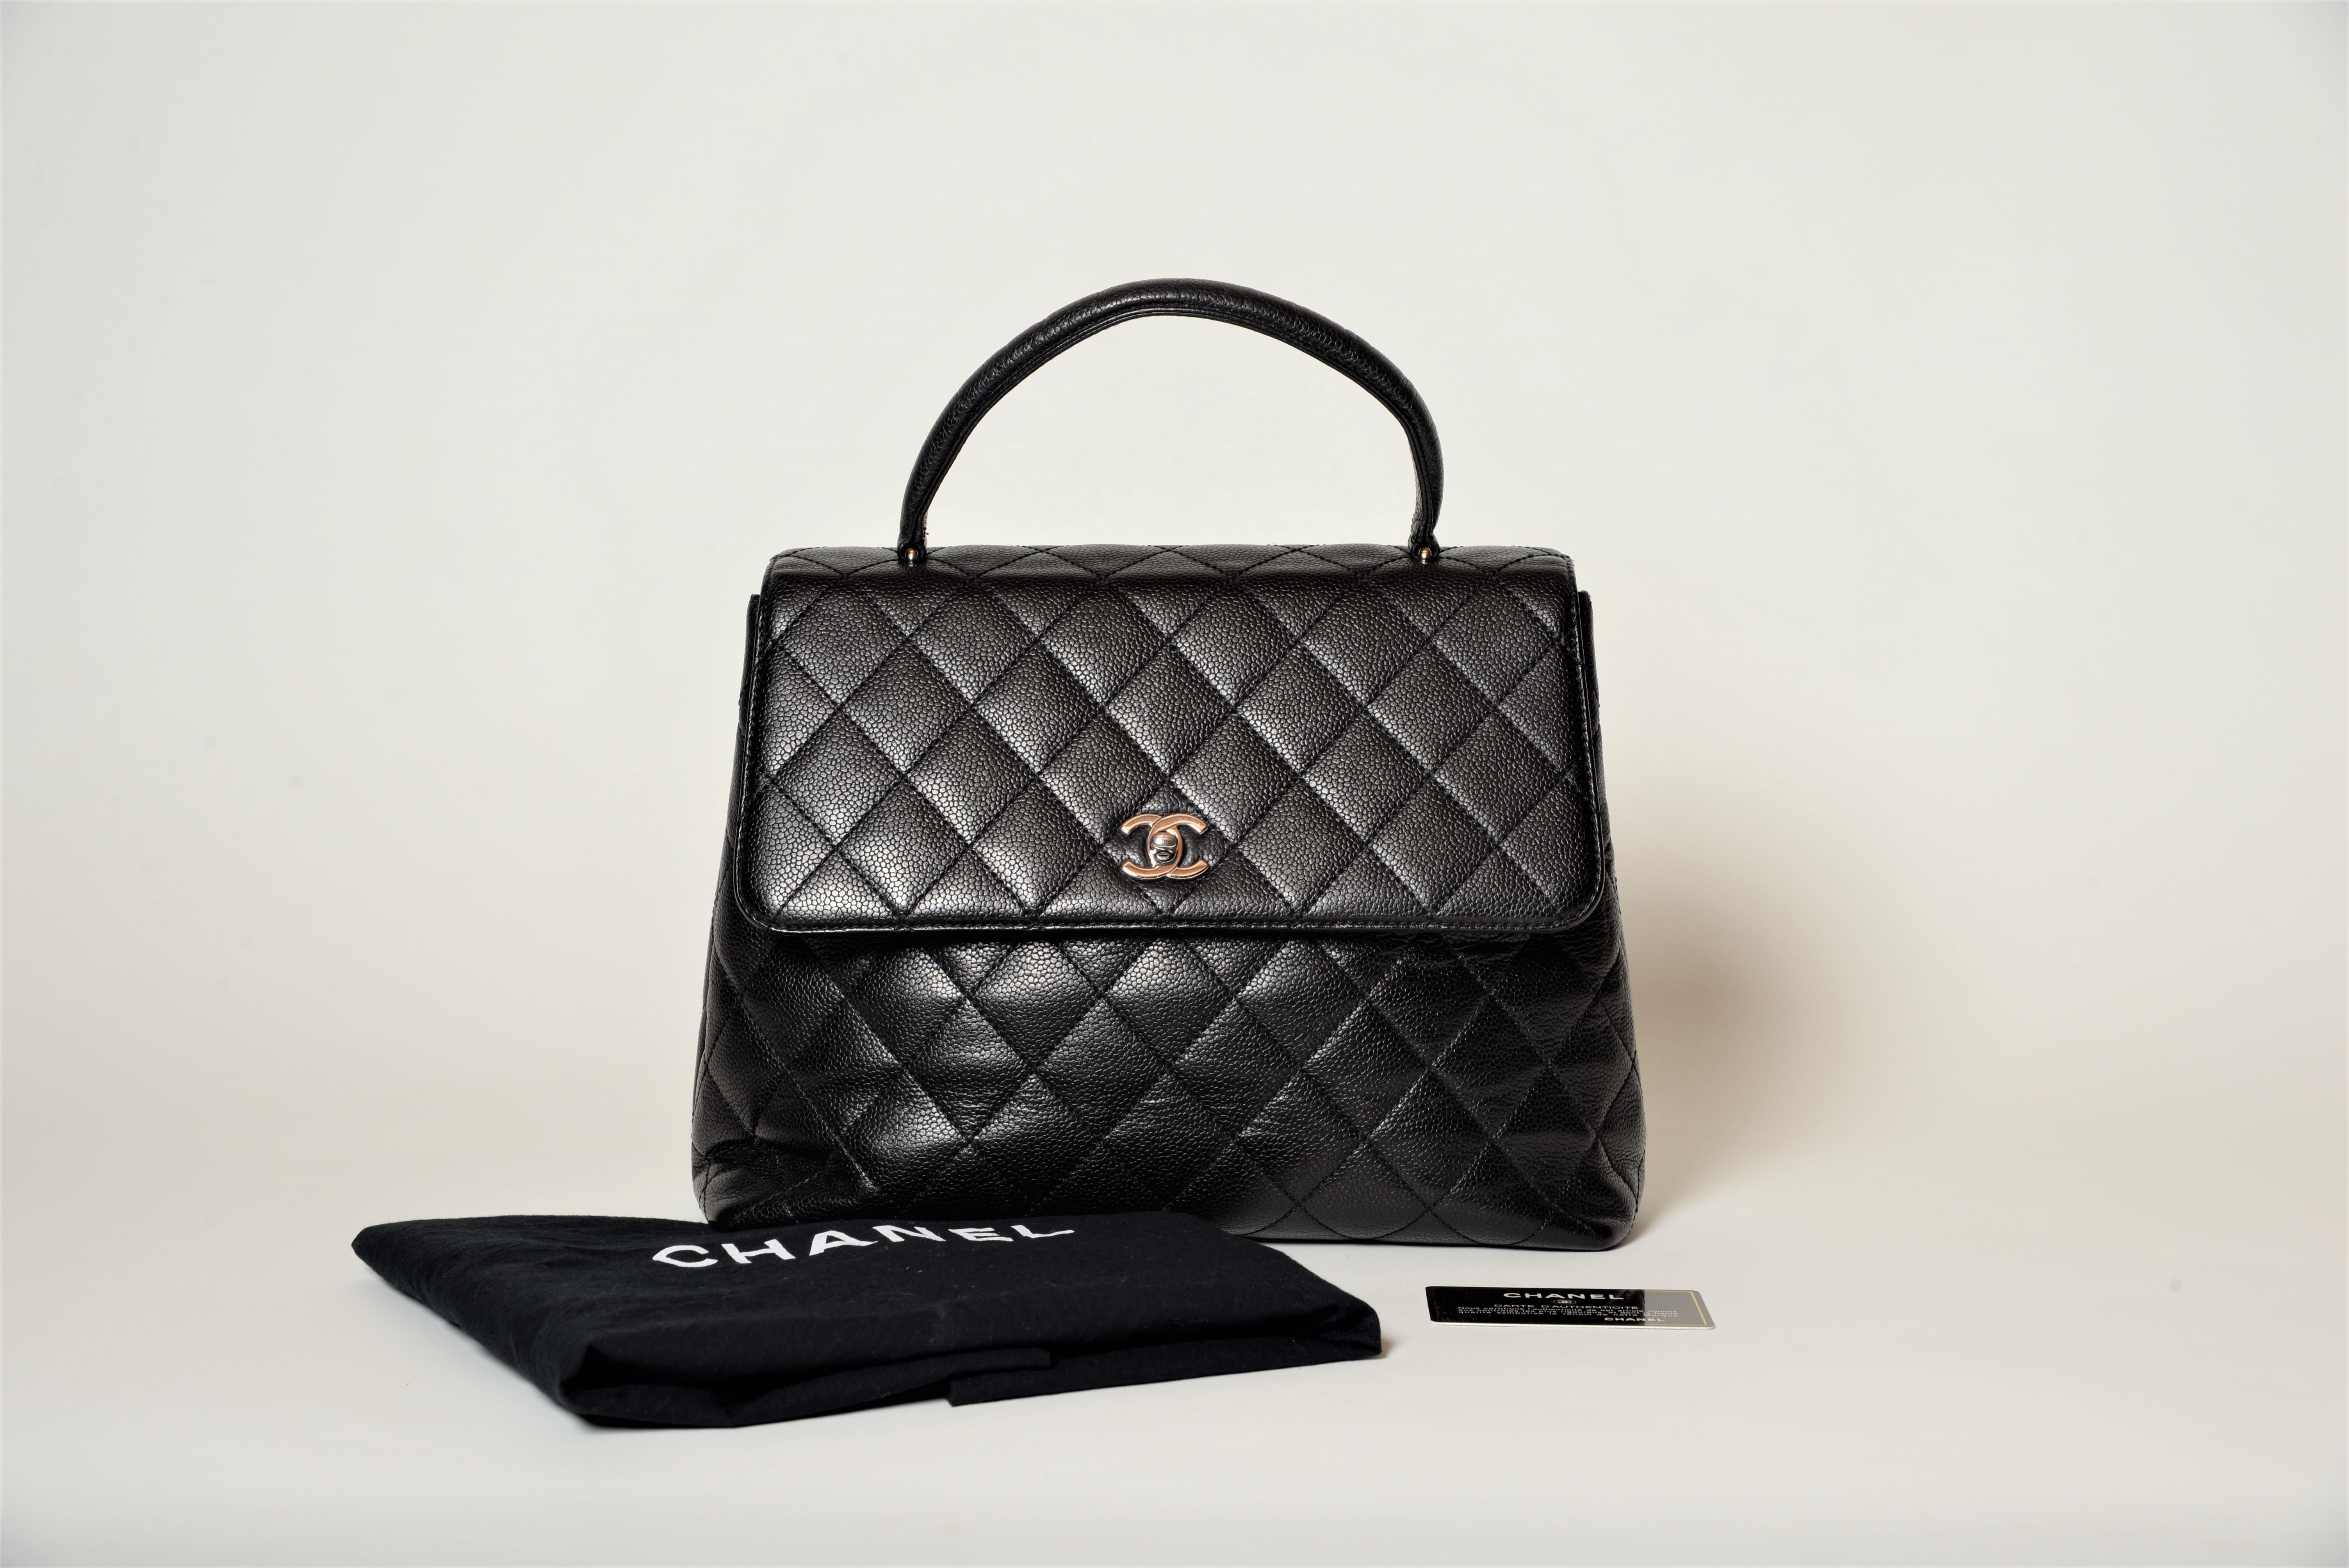 From the collection of SAVINETI we offer this Chanel Kelly Bag:
-	Brand: Chanel
-	Model: Kelly 
-	Year: 2000-2002
-	Code: 6374836
-	Condition: Good
-	Materials: Cavier Leather, Silver toned hardware 
-	Extras: Dustbag & Authenticity Card

We at